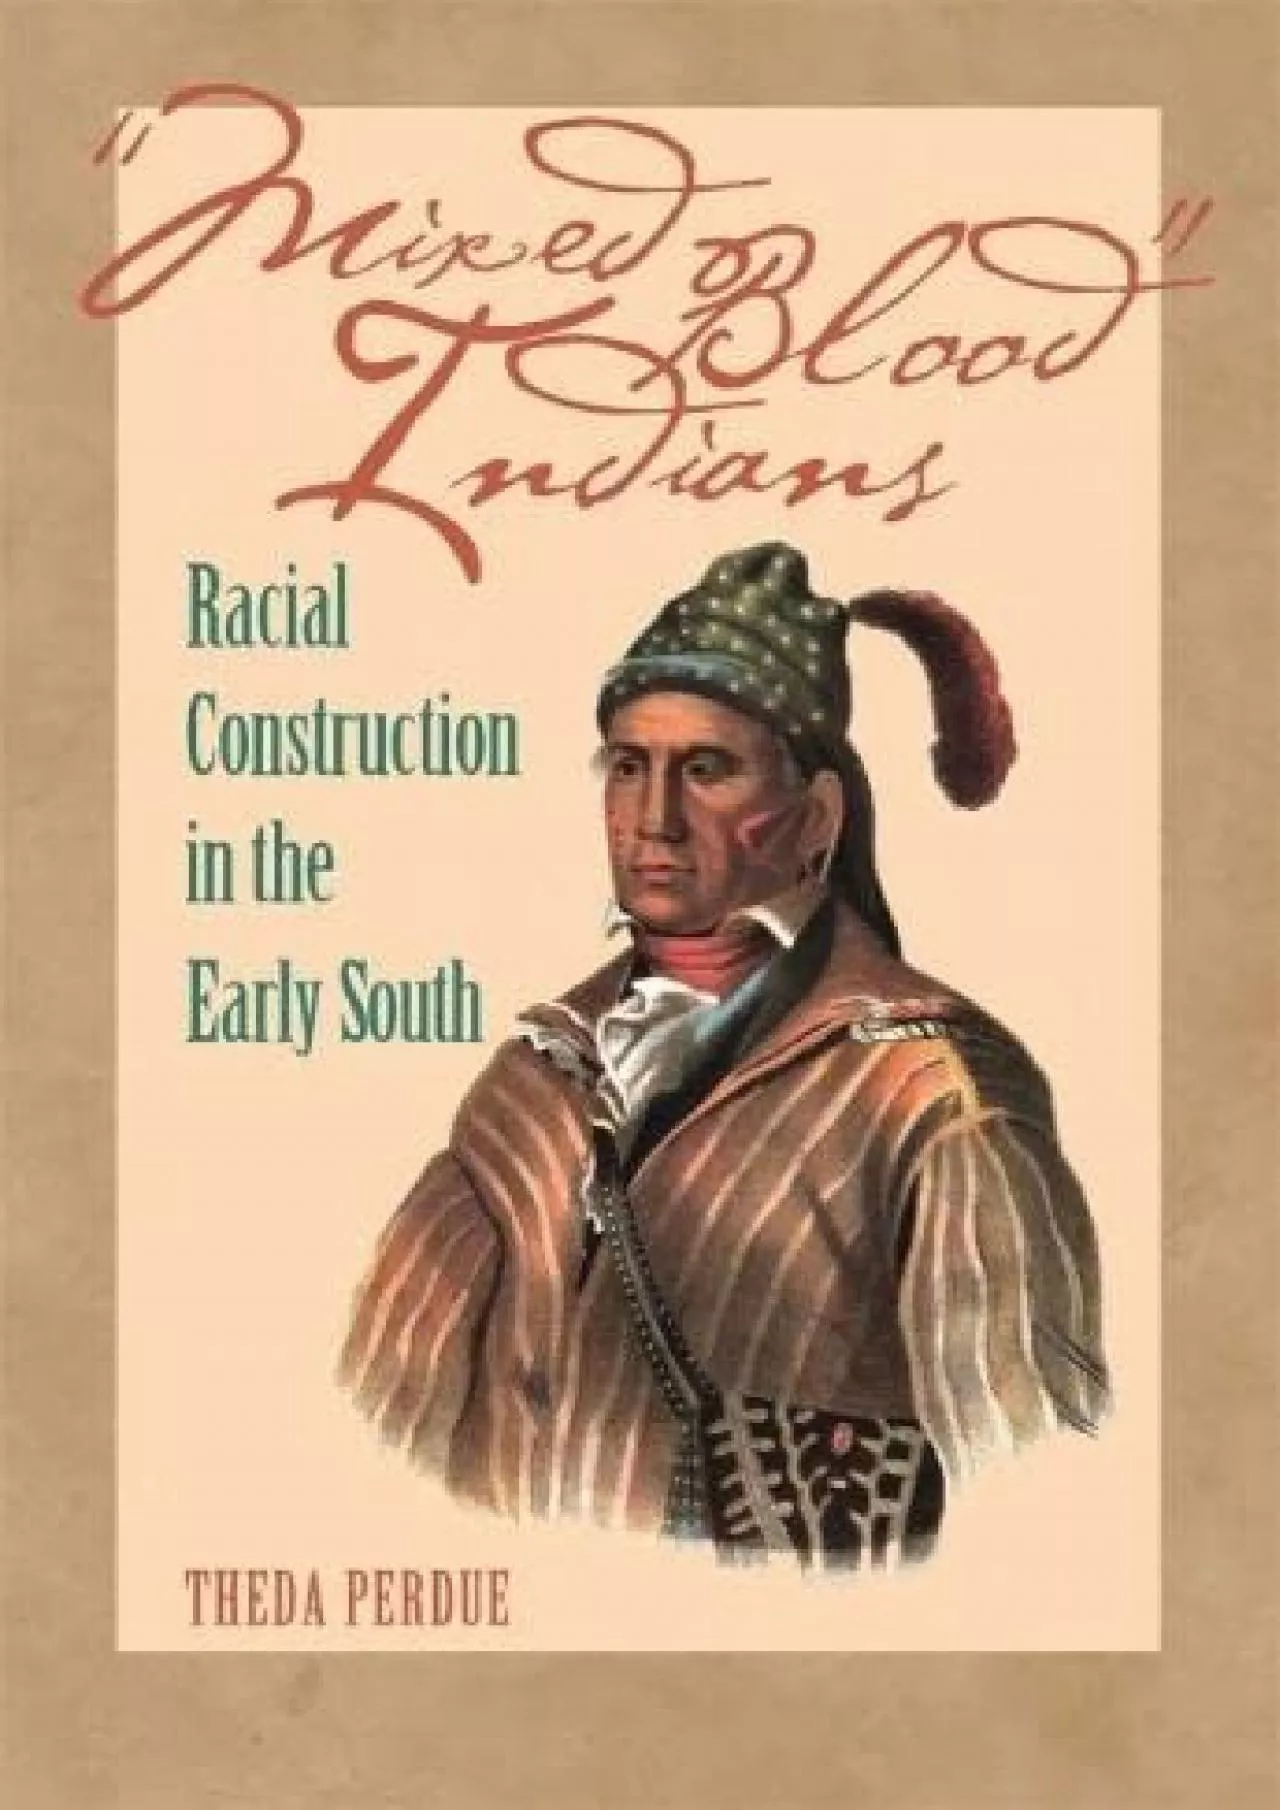 (EBOOK)-Mixed Blood Indians: Racial Construction in the Early South (Mercer University